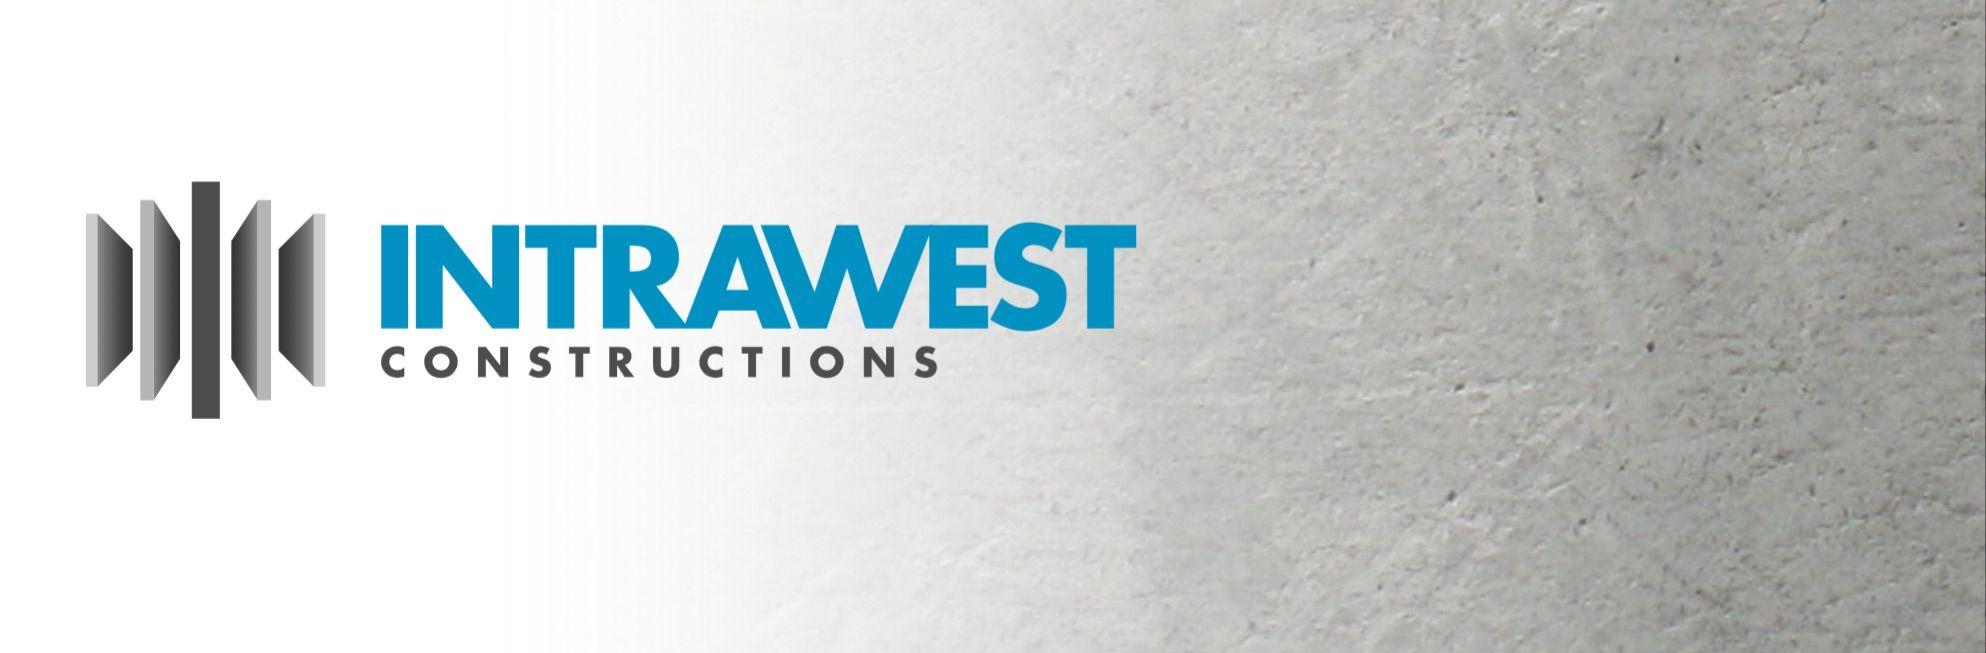 Intrawest Logo - commercial and domestic developments melbourne |Intrawest Constructions